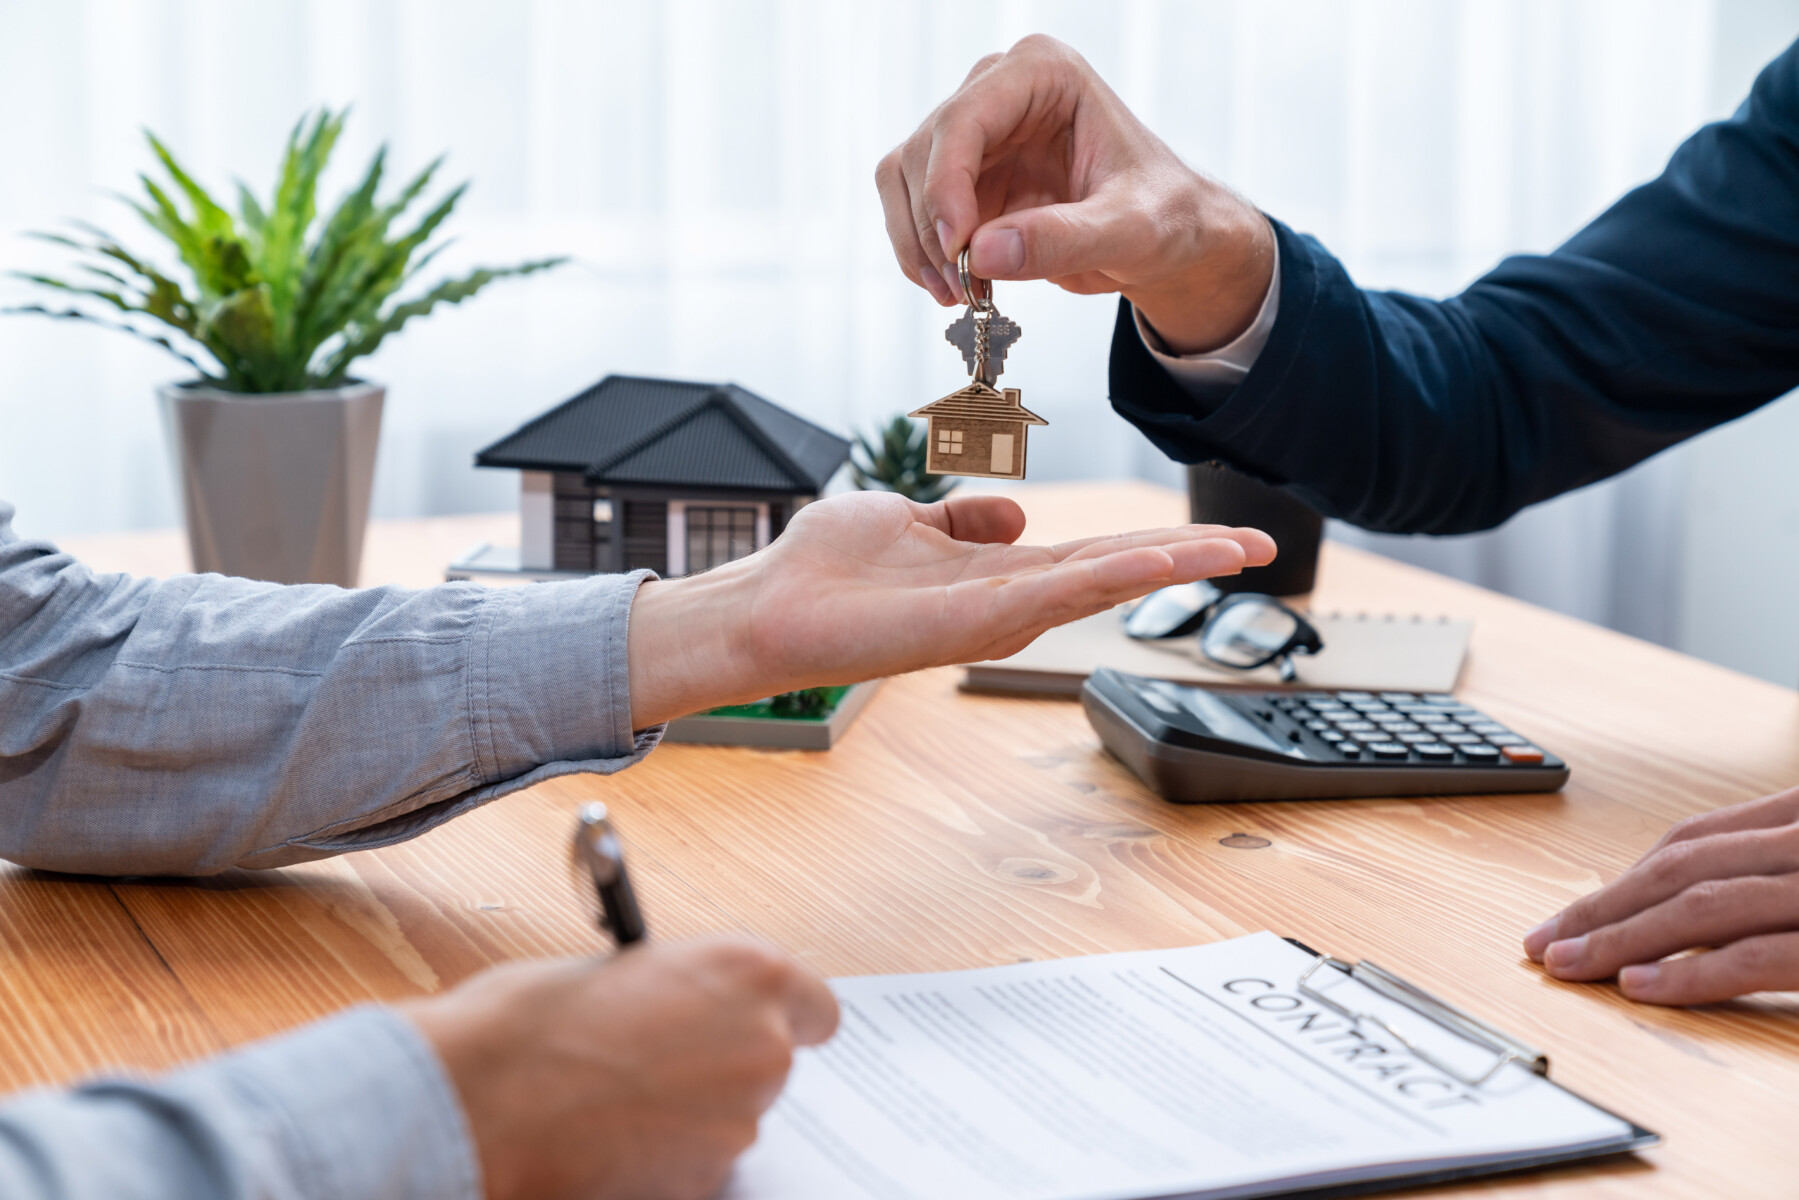 Real estate agent handing house key to buyer after signing rental least contract during house loan meeting. Successful property sale purchase agreement for new home ownership. Entity